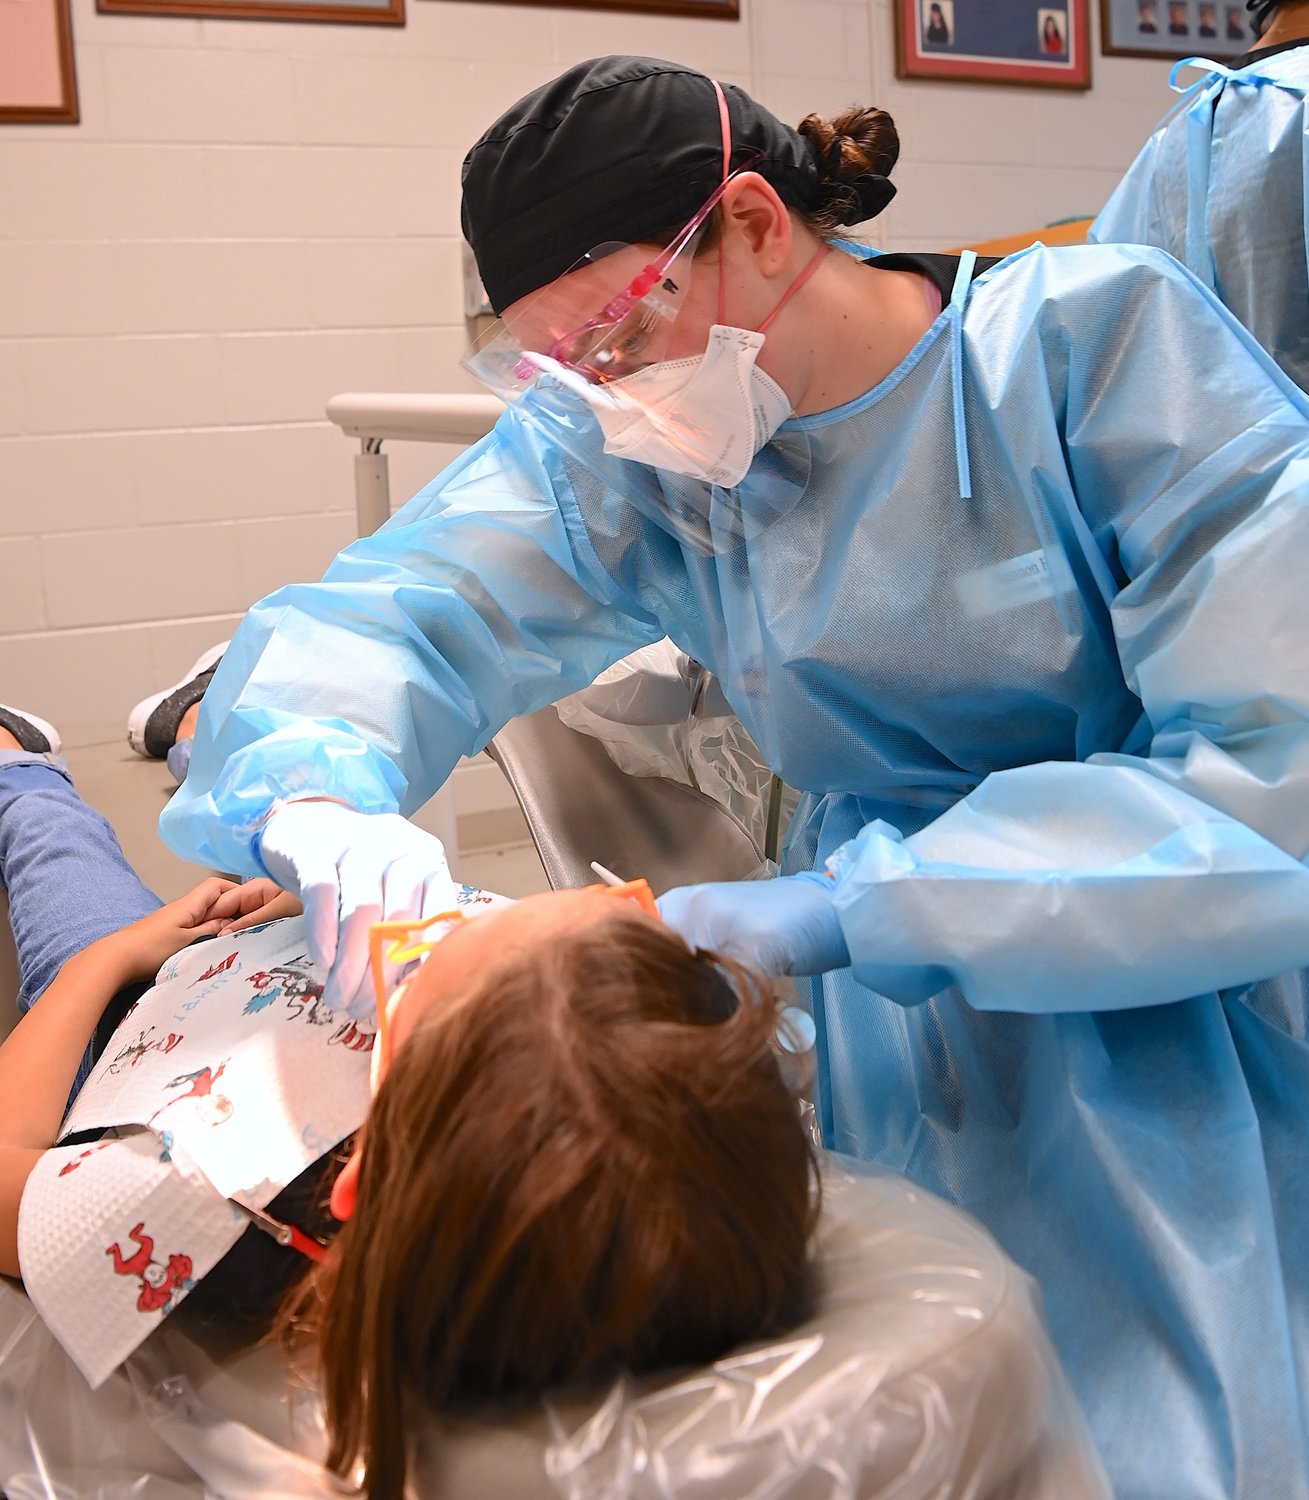 Fayetteville Technical Community College will host a free Youth Dental Health Fair on Saturday from 9 a.m. to 1 p.m. at the Horace Sisk Gymnasium.